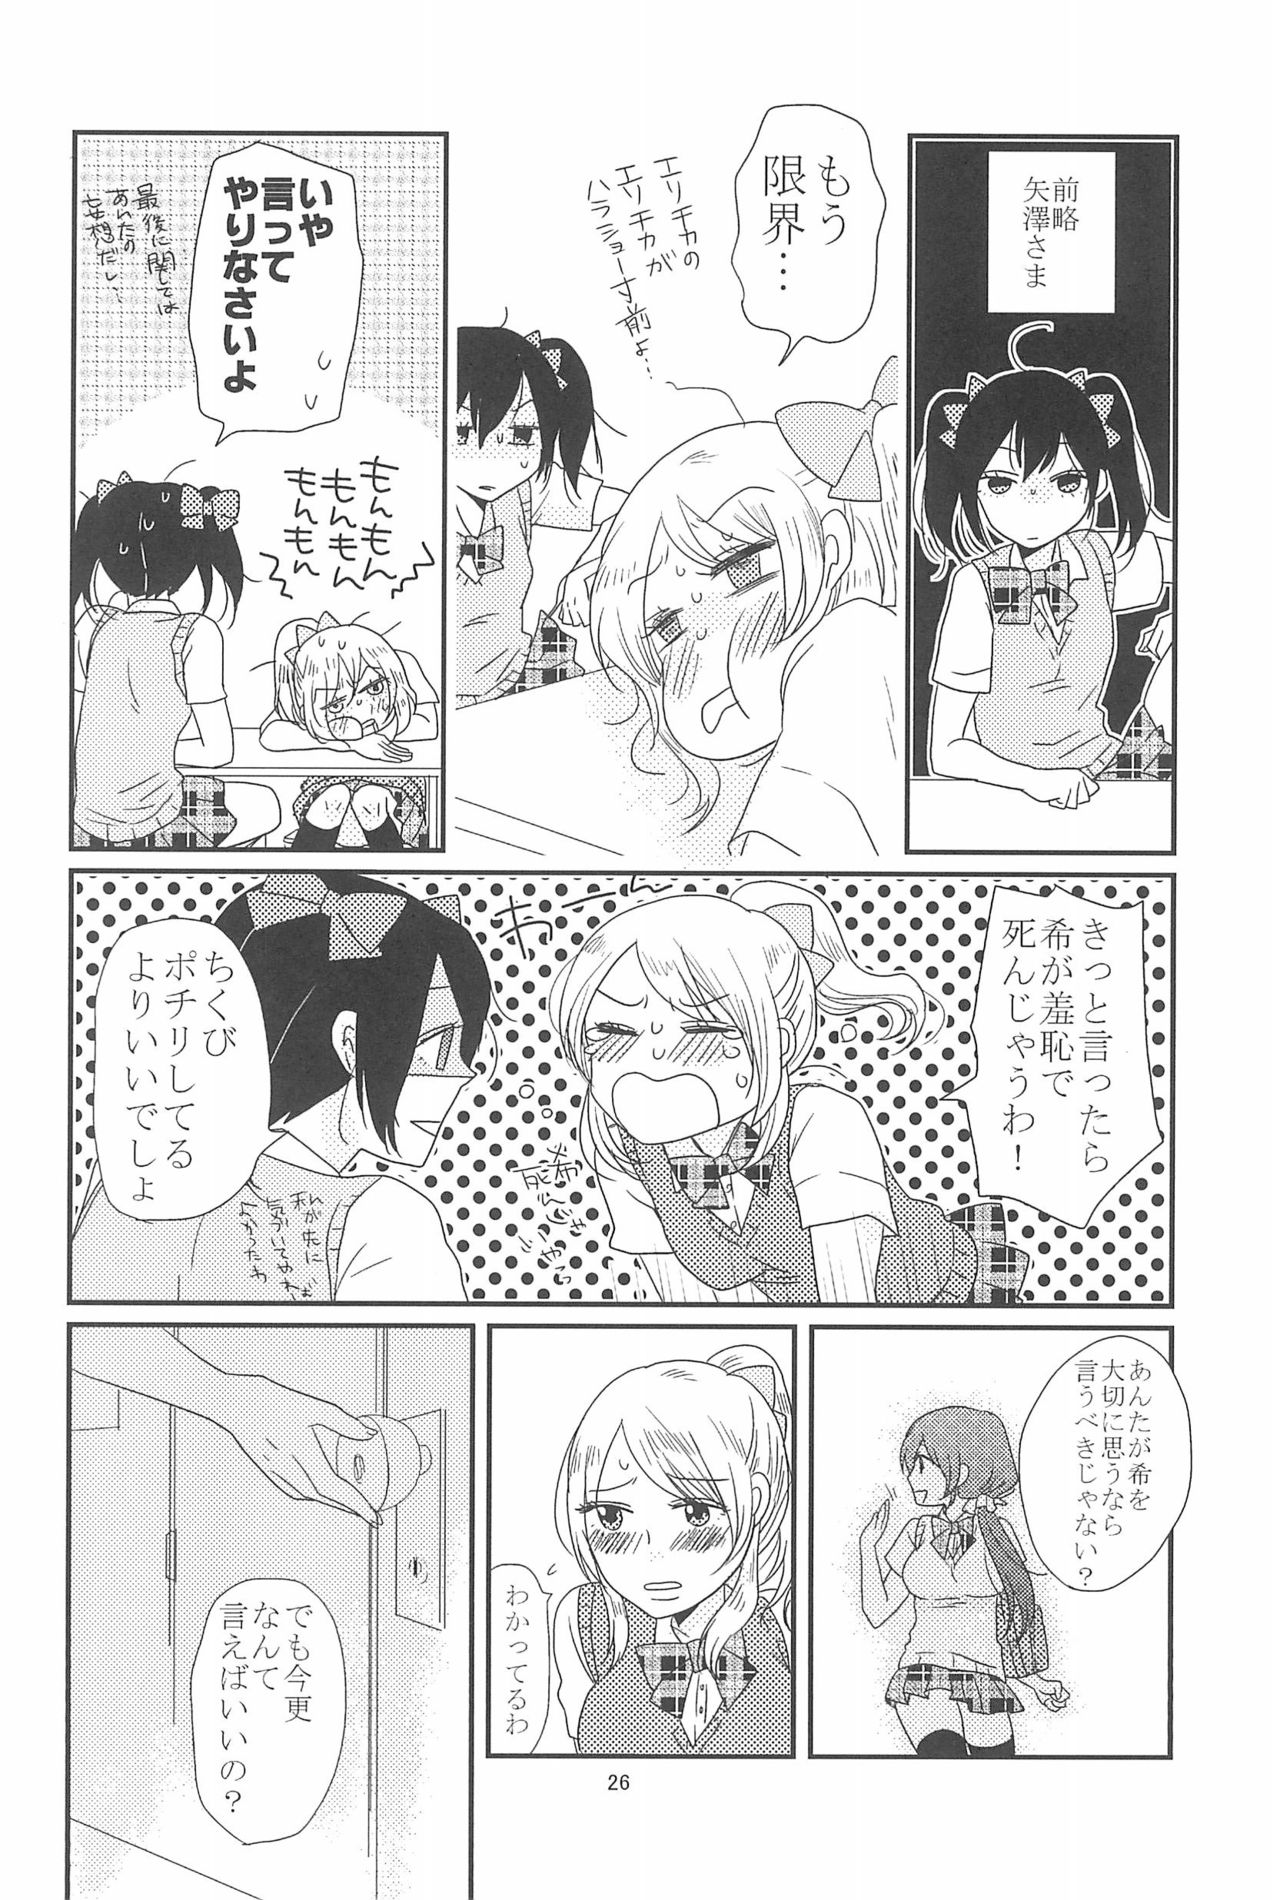 (C90) [BK*N2 (Mikawa Miso)] HAPPY GO LUCKY DAYS (Love Live!) page 30 full